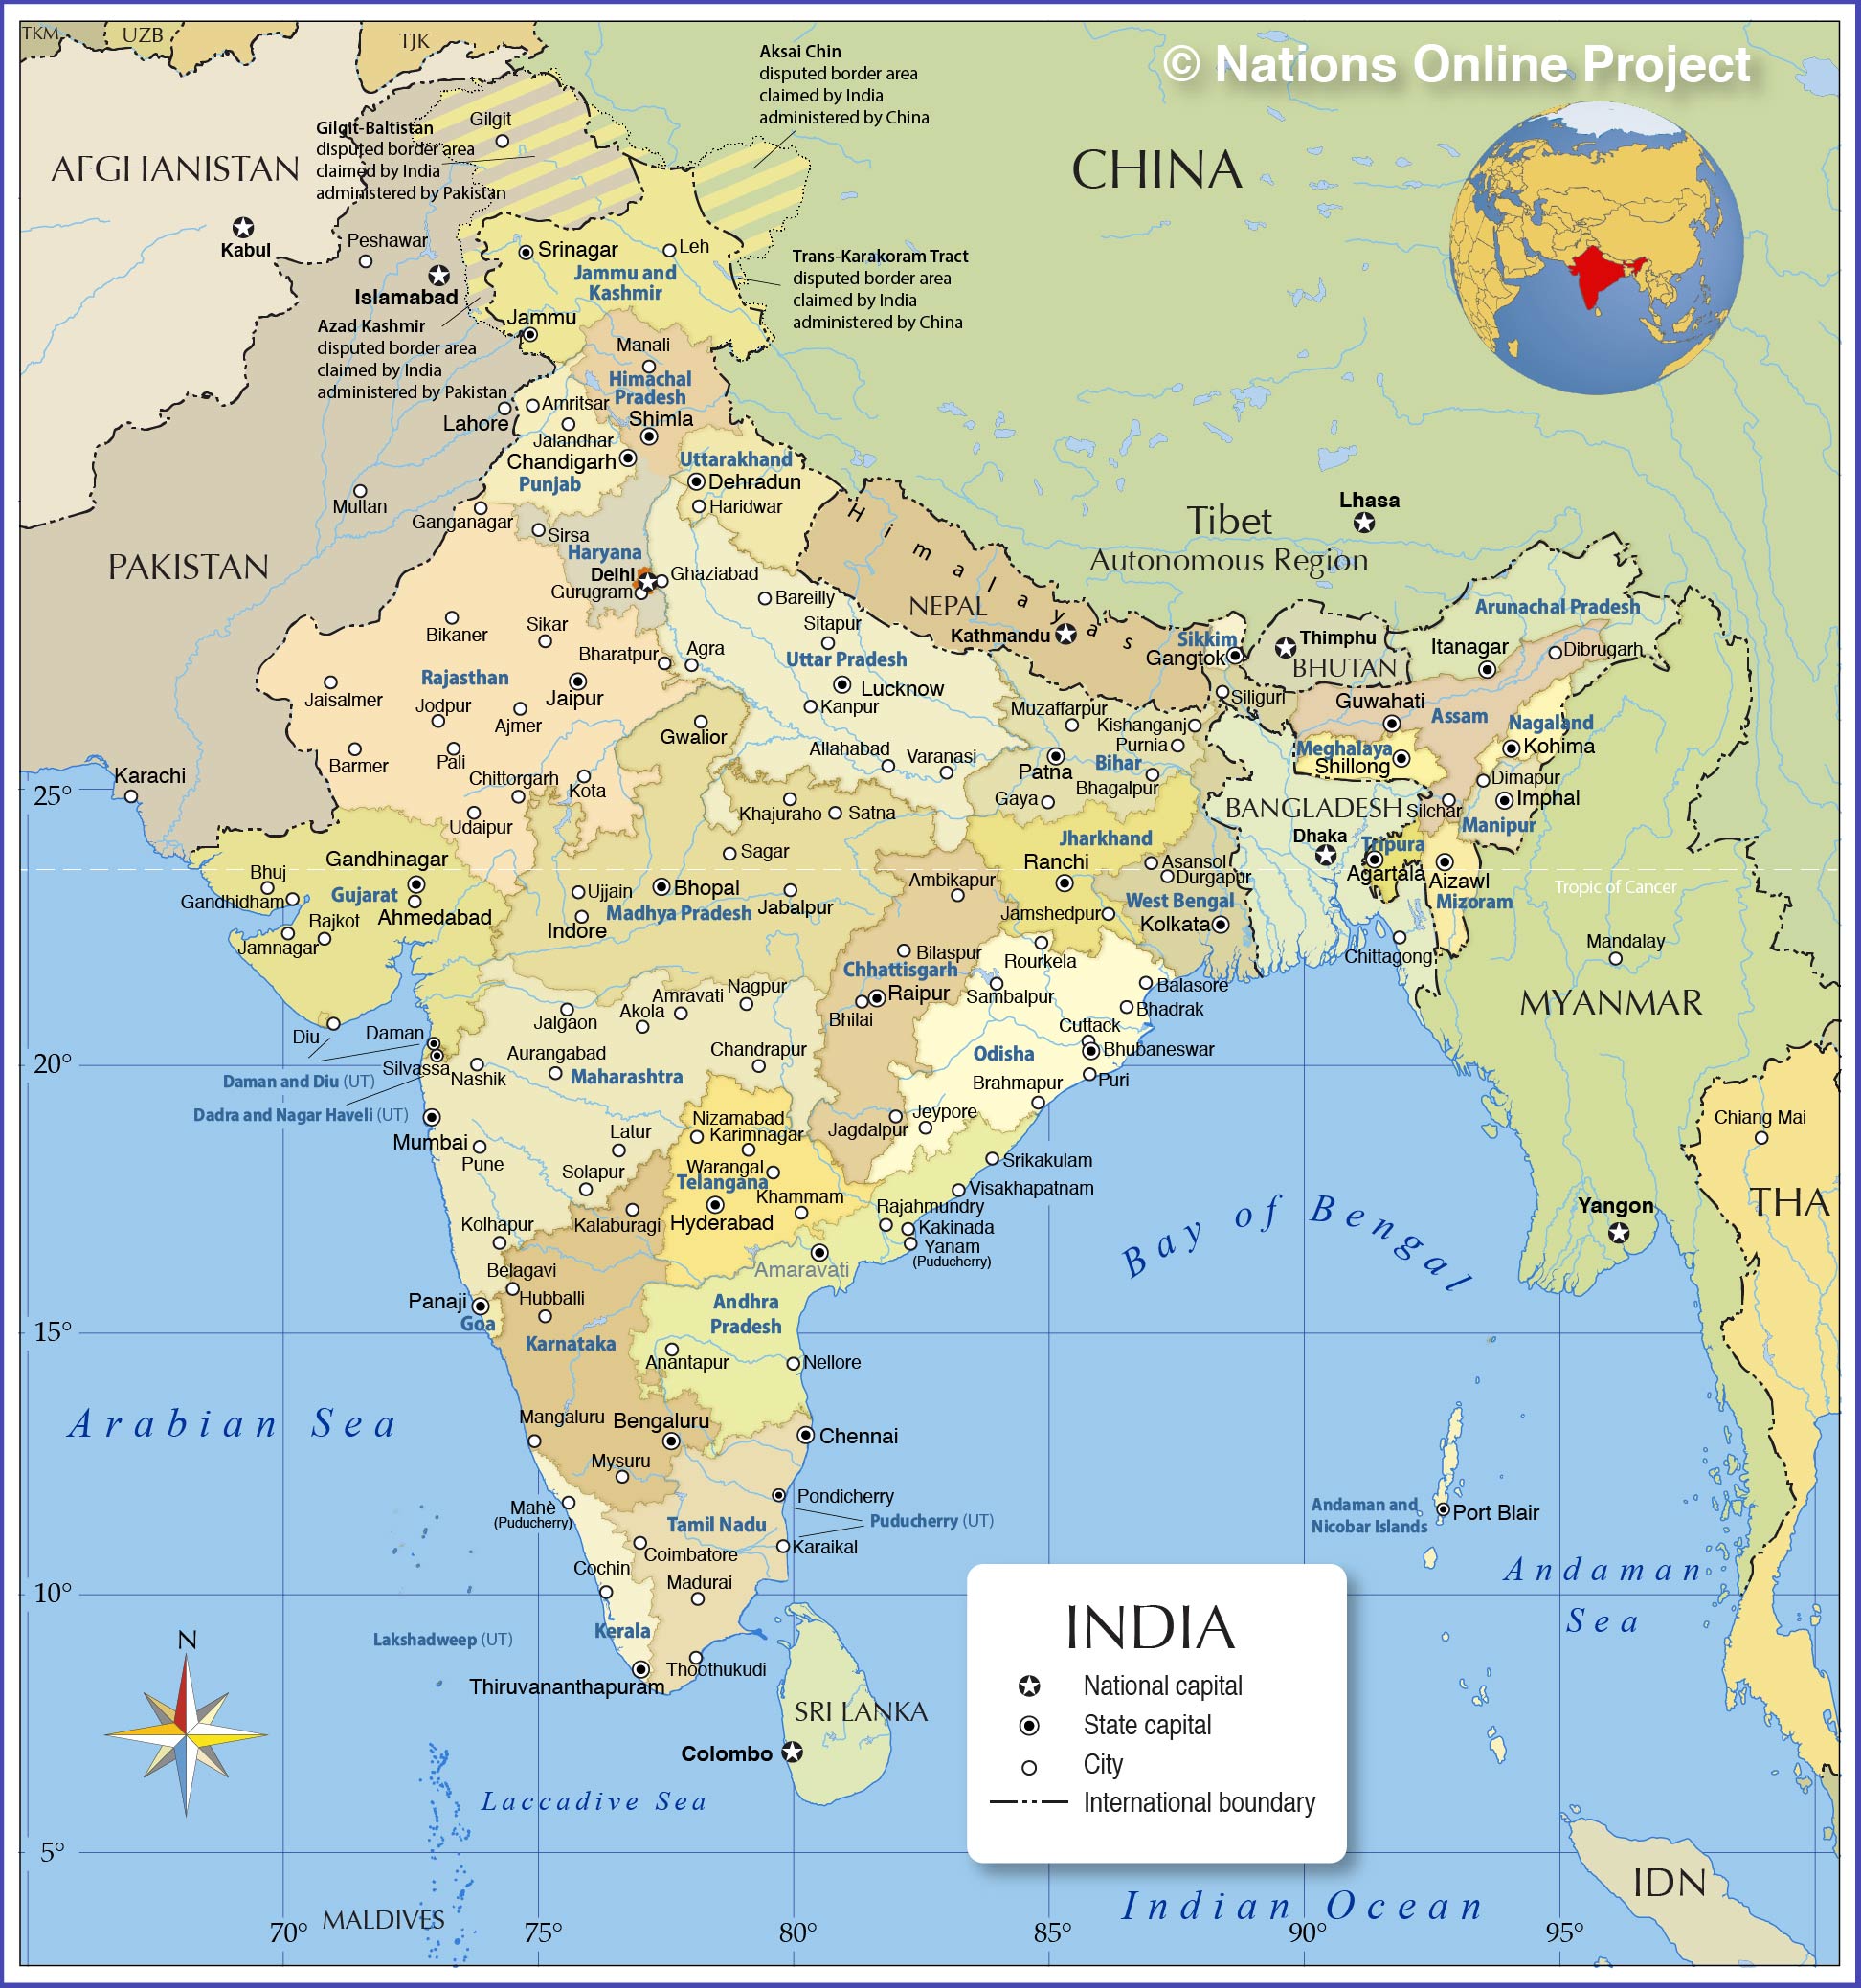 india map with all major cities Political Map Of India S States Nations Online Project india map with all major cities